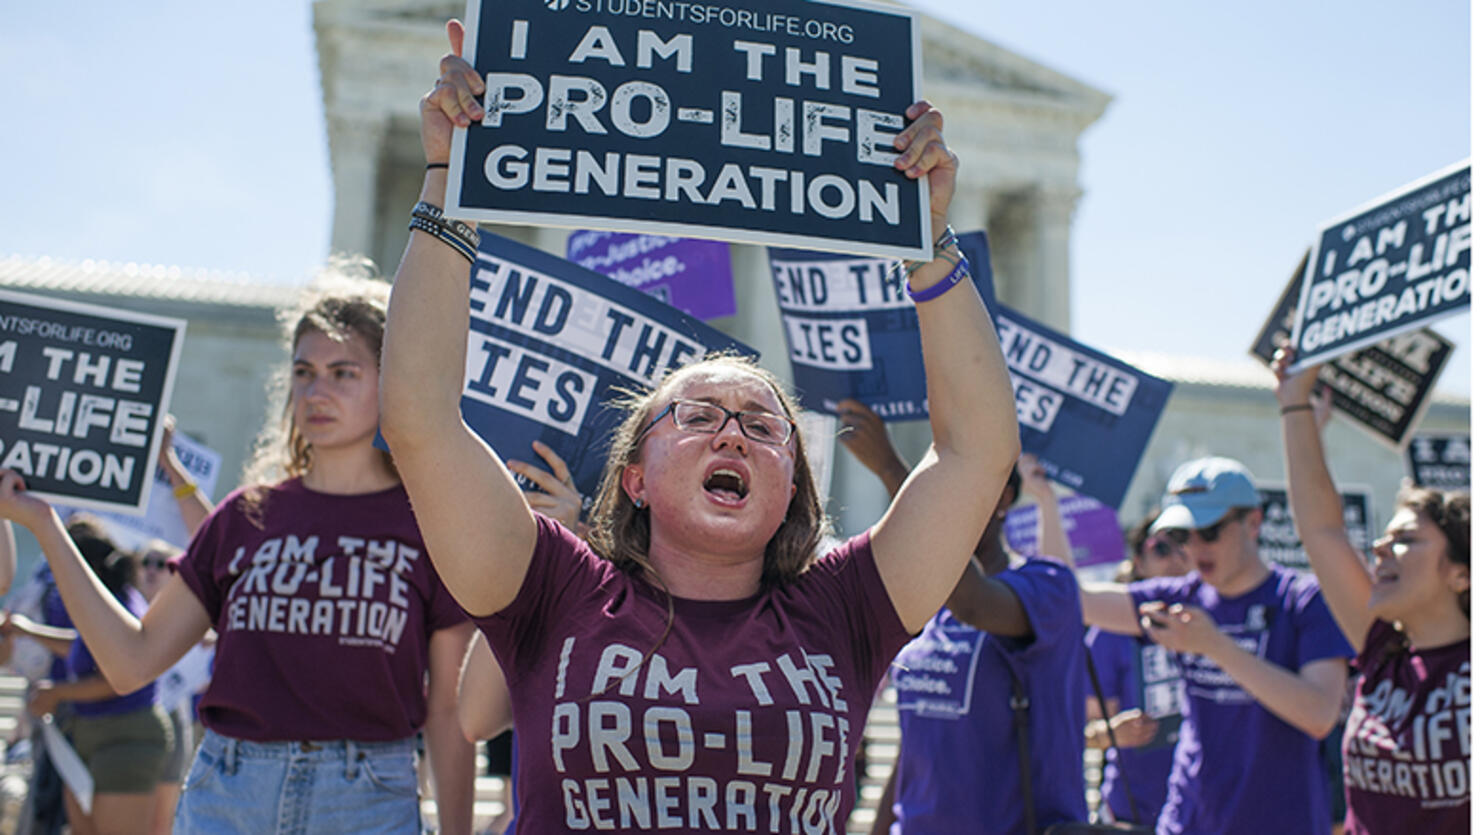 Pro-life protesters rally outside Supreme Court